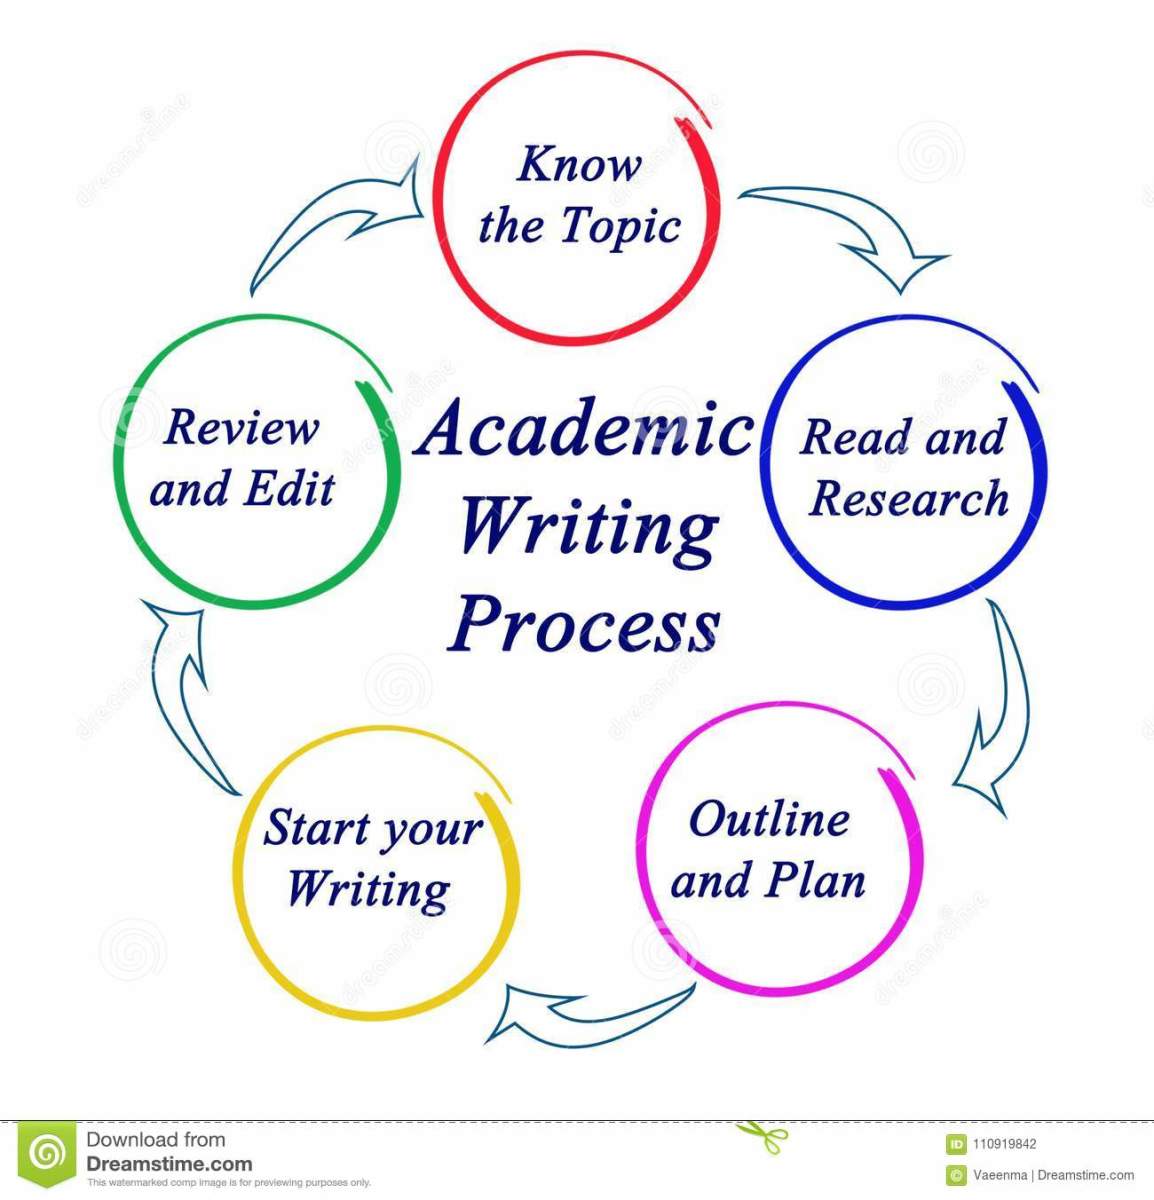 skills-to-learn-in-academic-writing